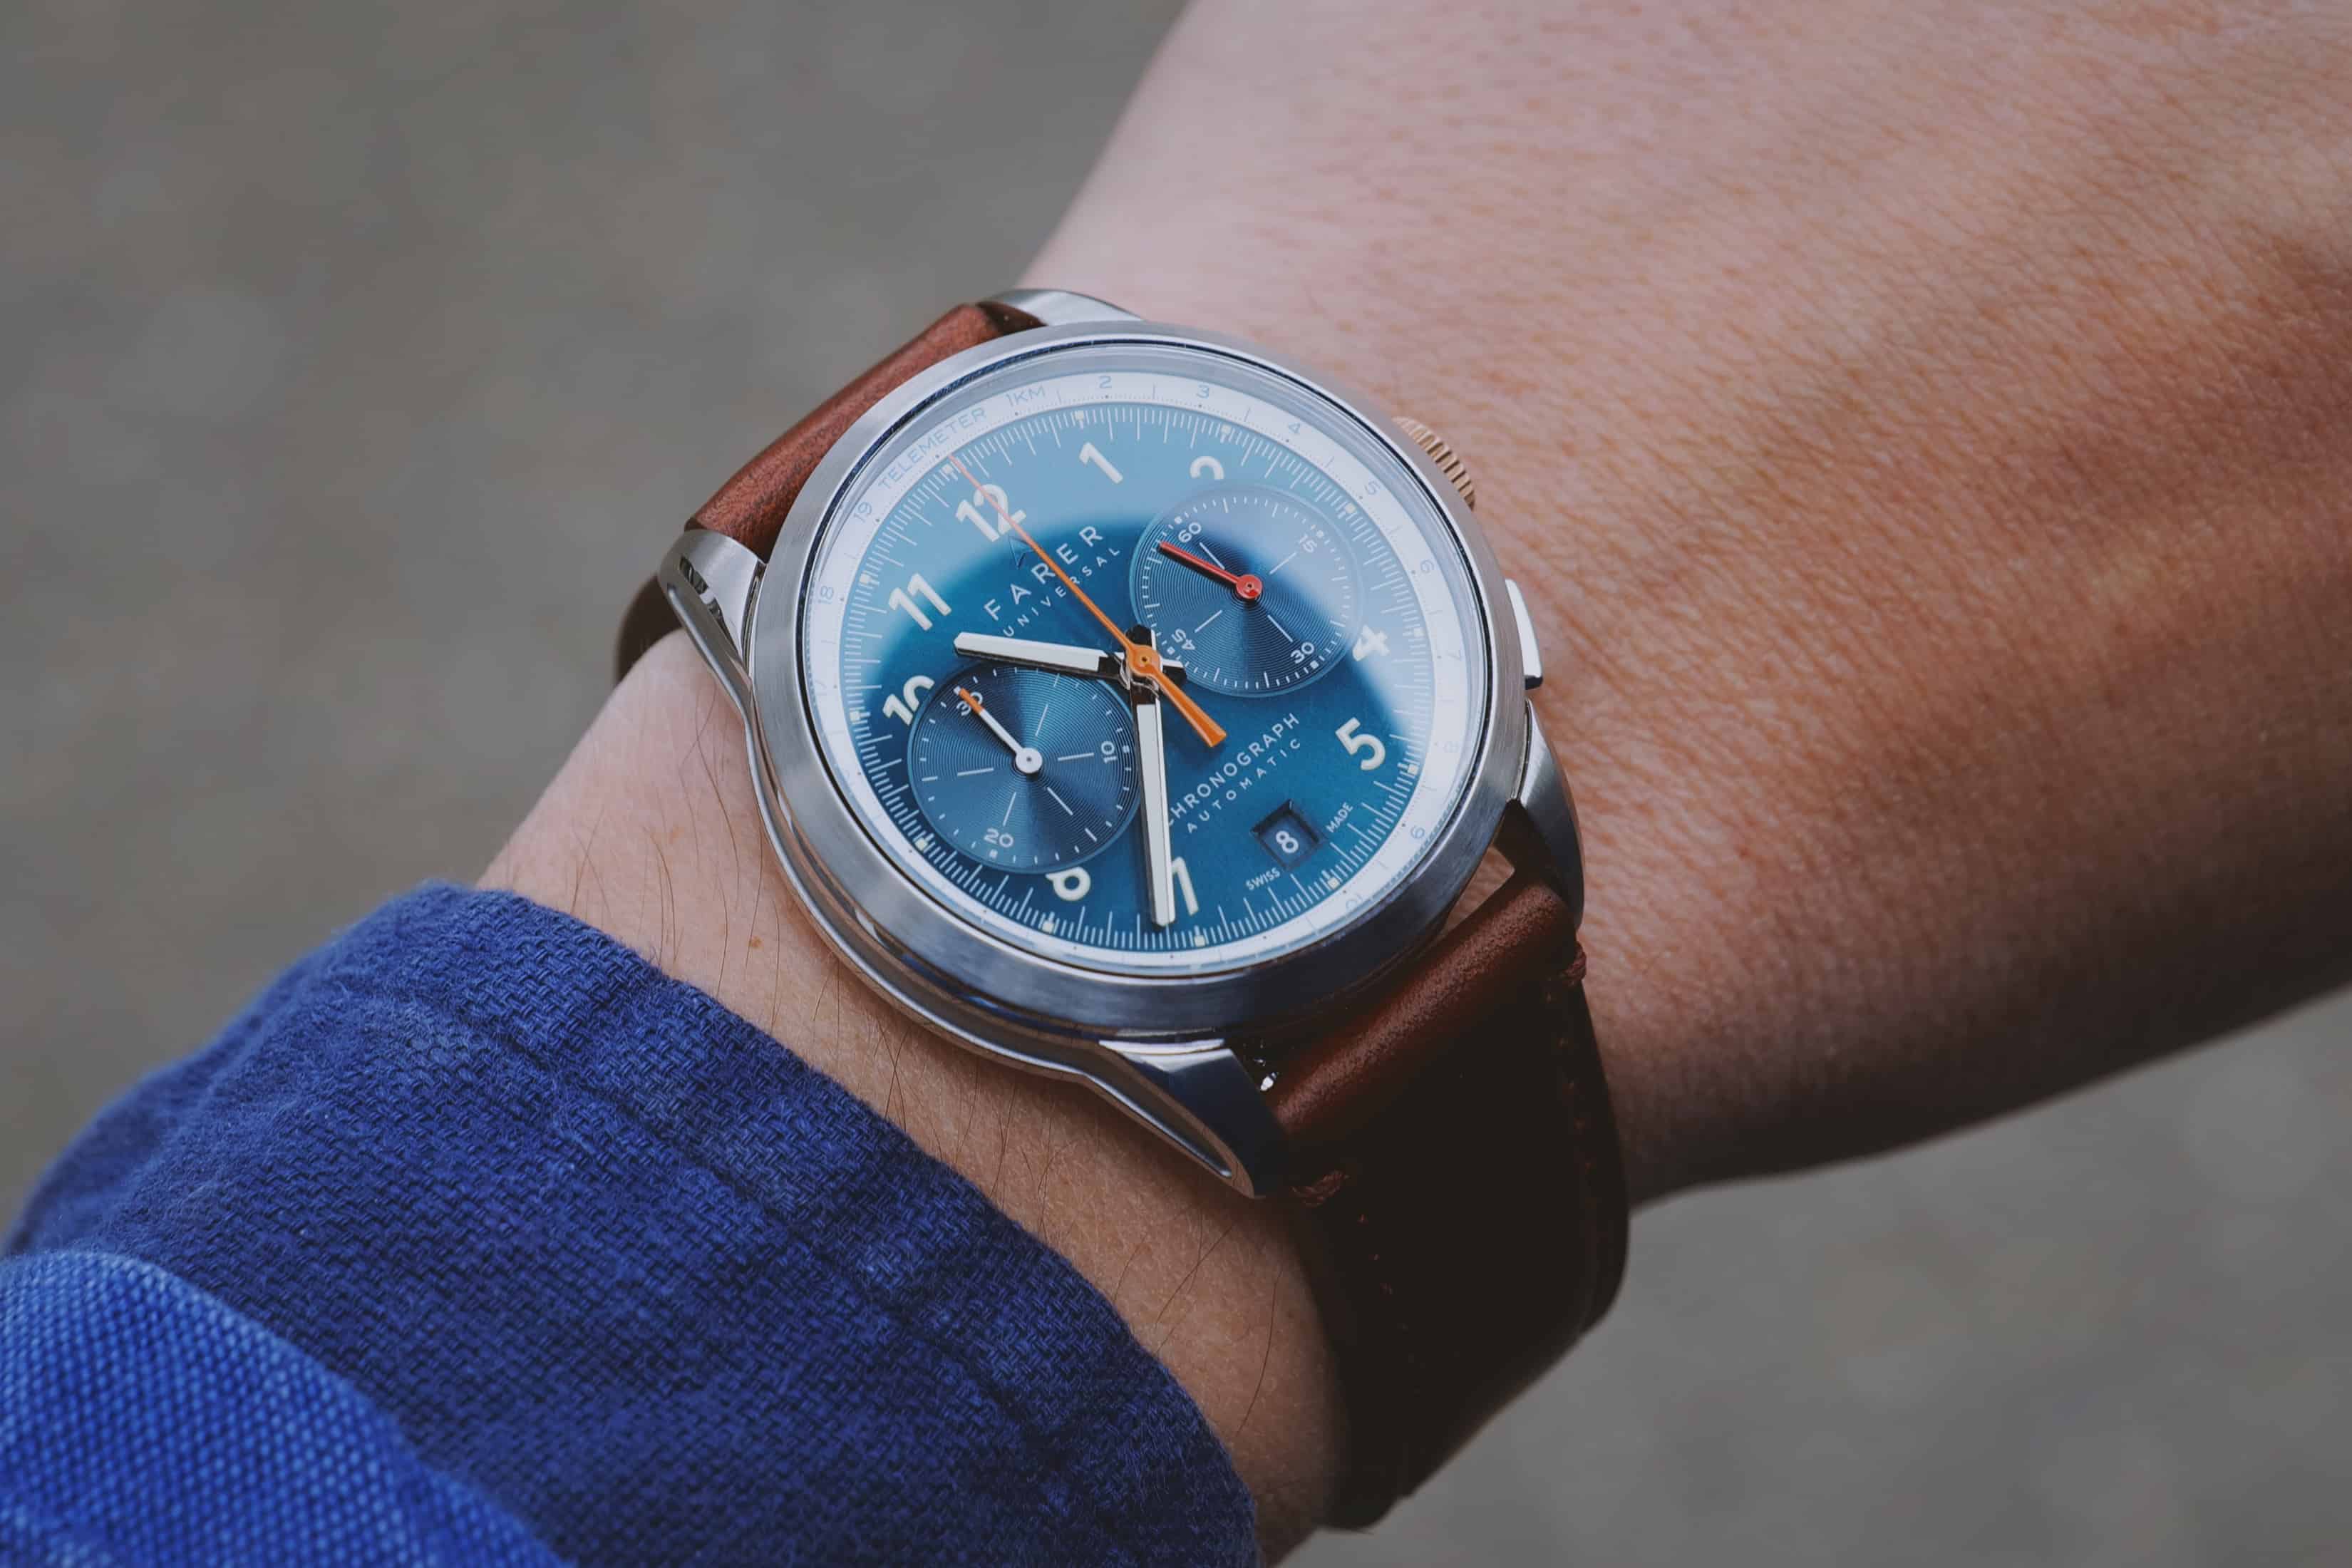 Introducing the Lander Chronograph from Farer